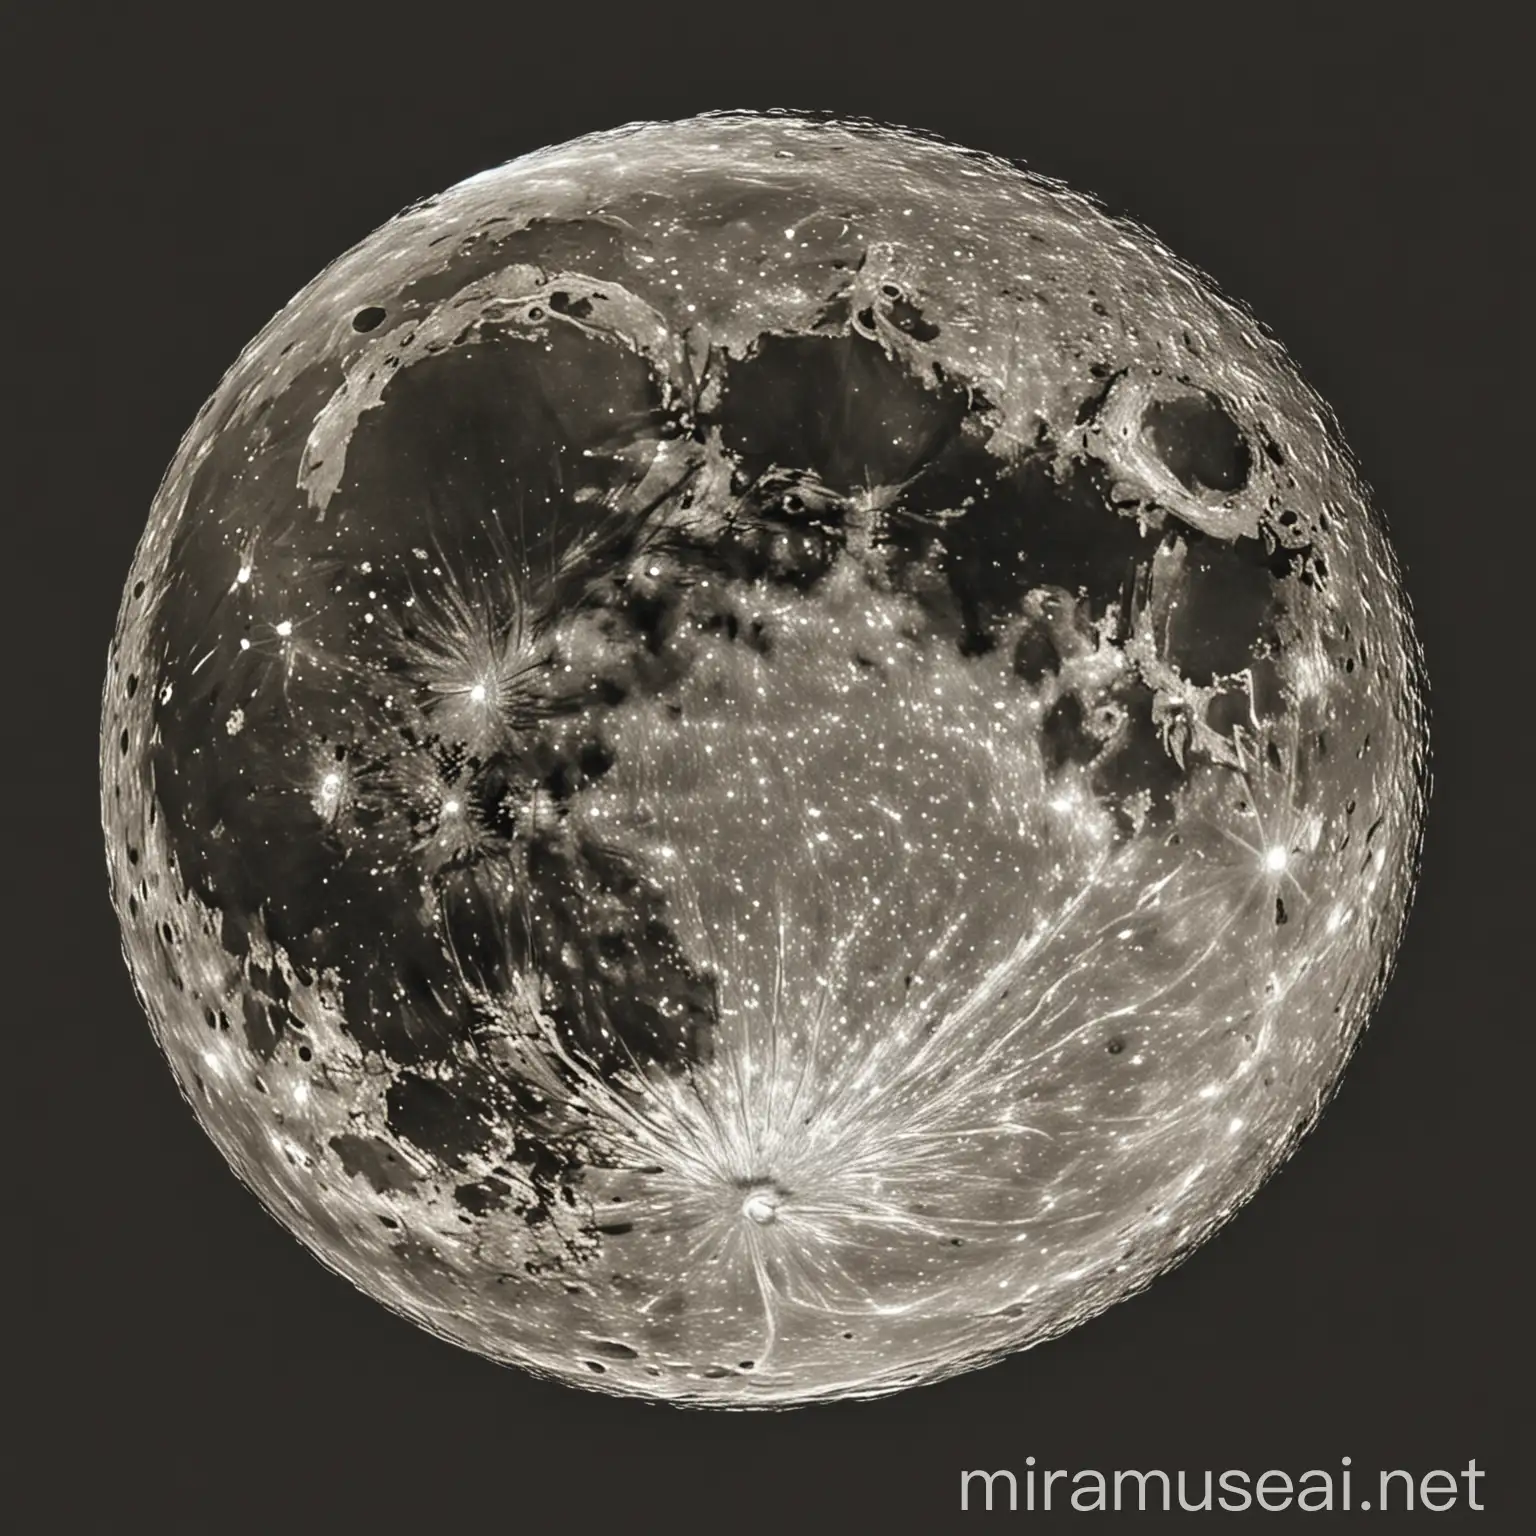 Moon with Engraving Artwork Celestial Sphere with Intricate Lunar Patterns